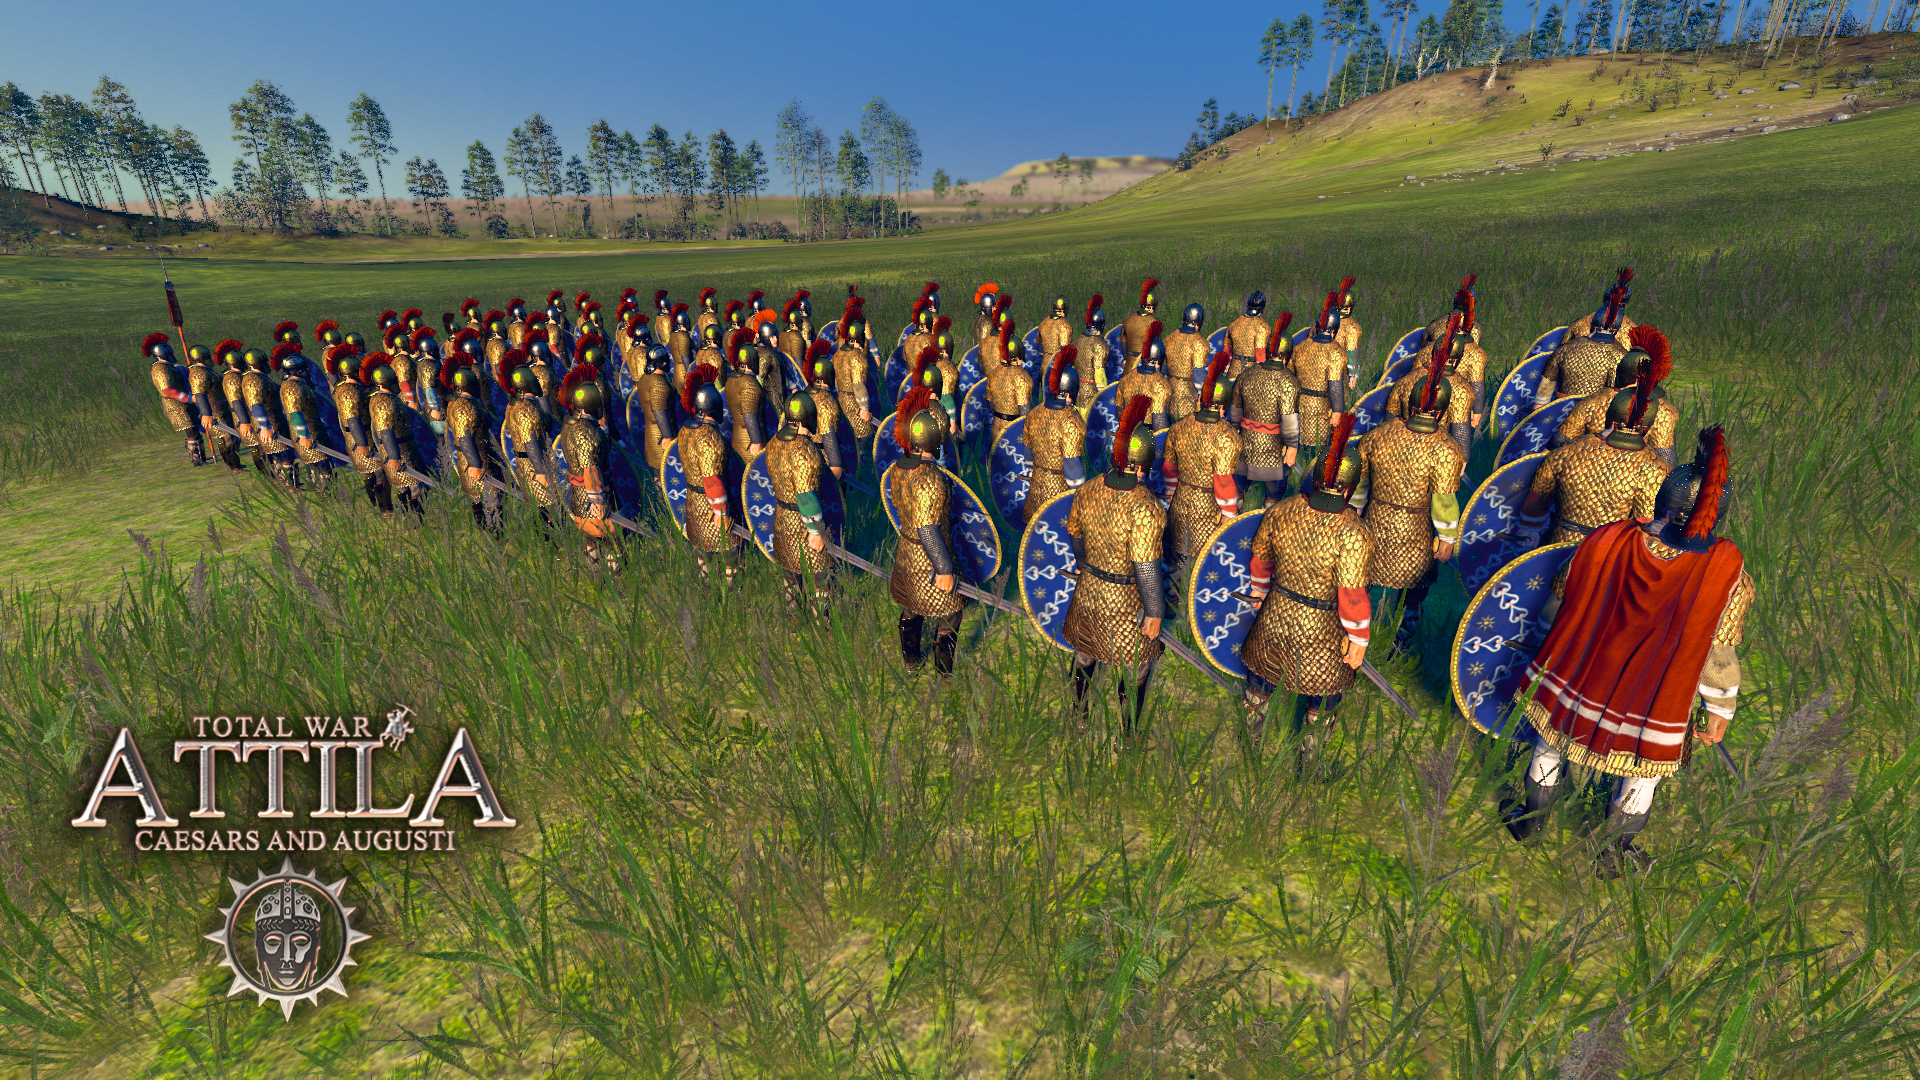 android total war attila images